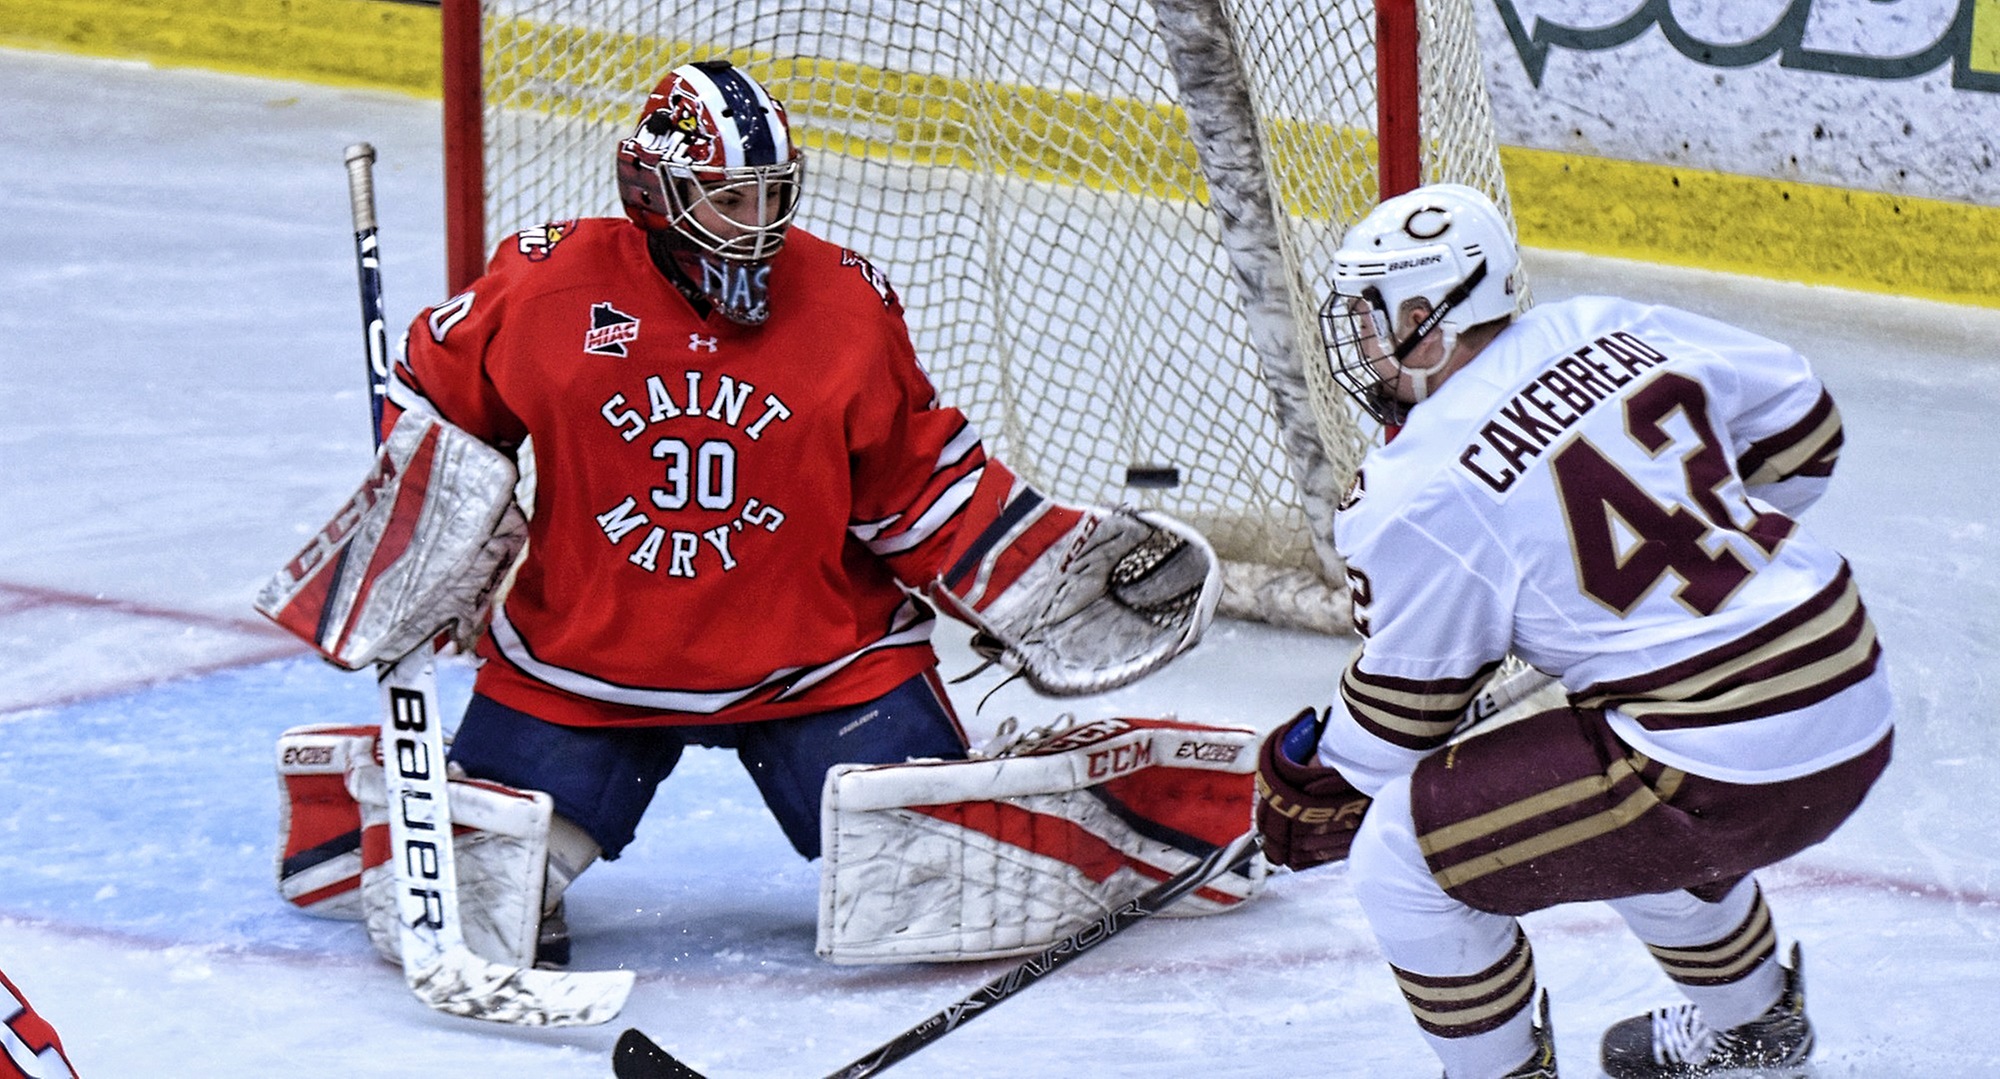 Junior Christian Cakebread watches Alex Stoley's shot elude the St. Mary's goalie to give the Cobbers a 2-1 lead in the third period of the MIAC opener.